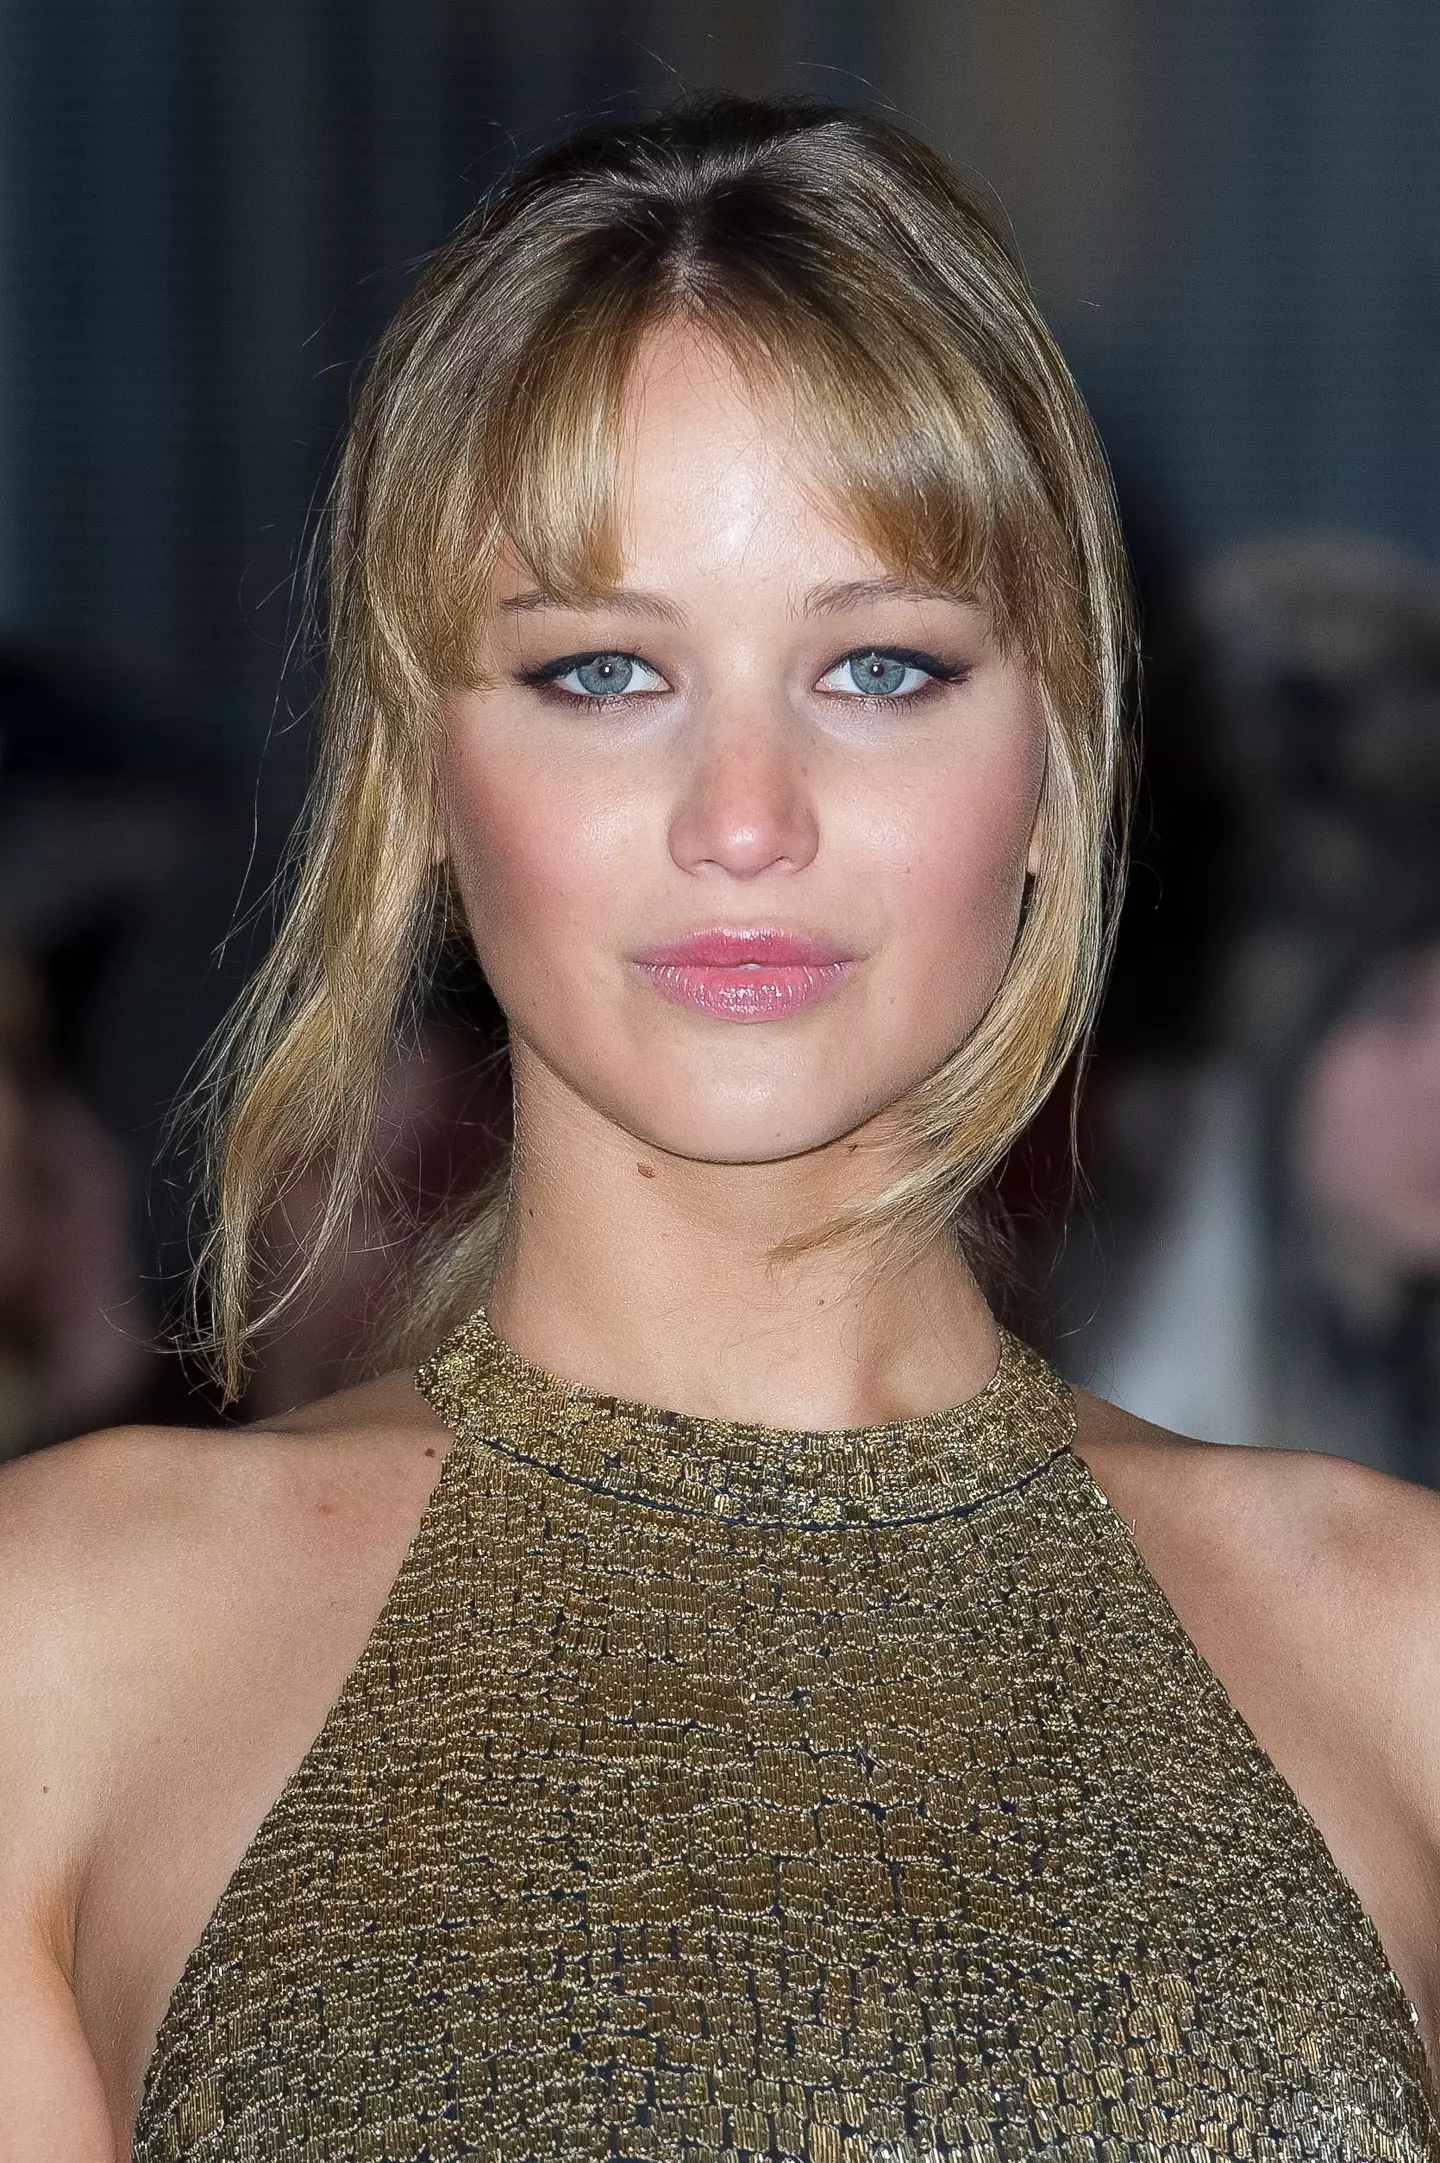 Jennifer Lawrence caused quite a stir recently.